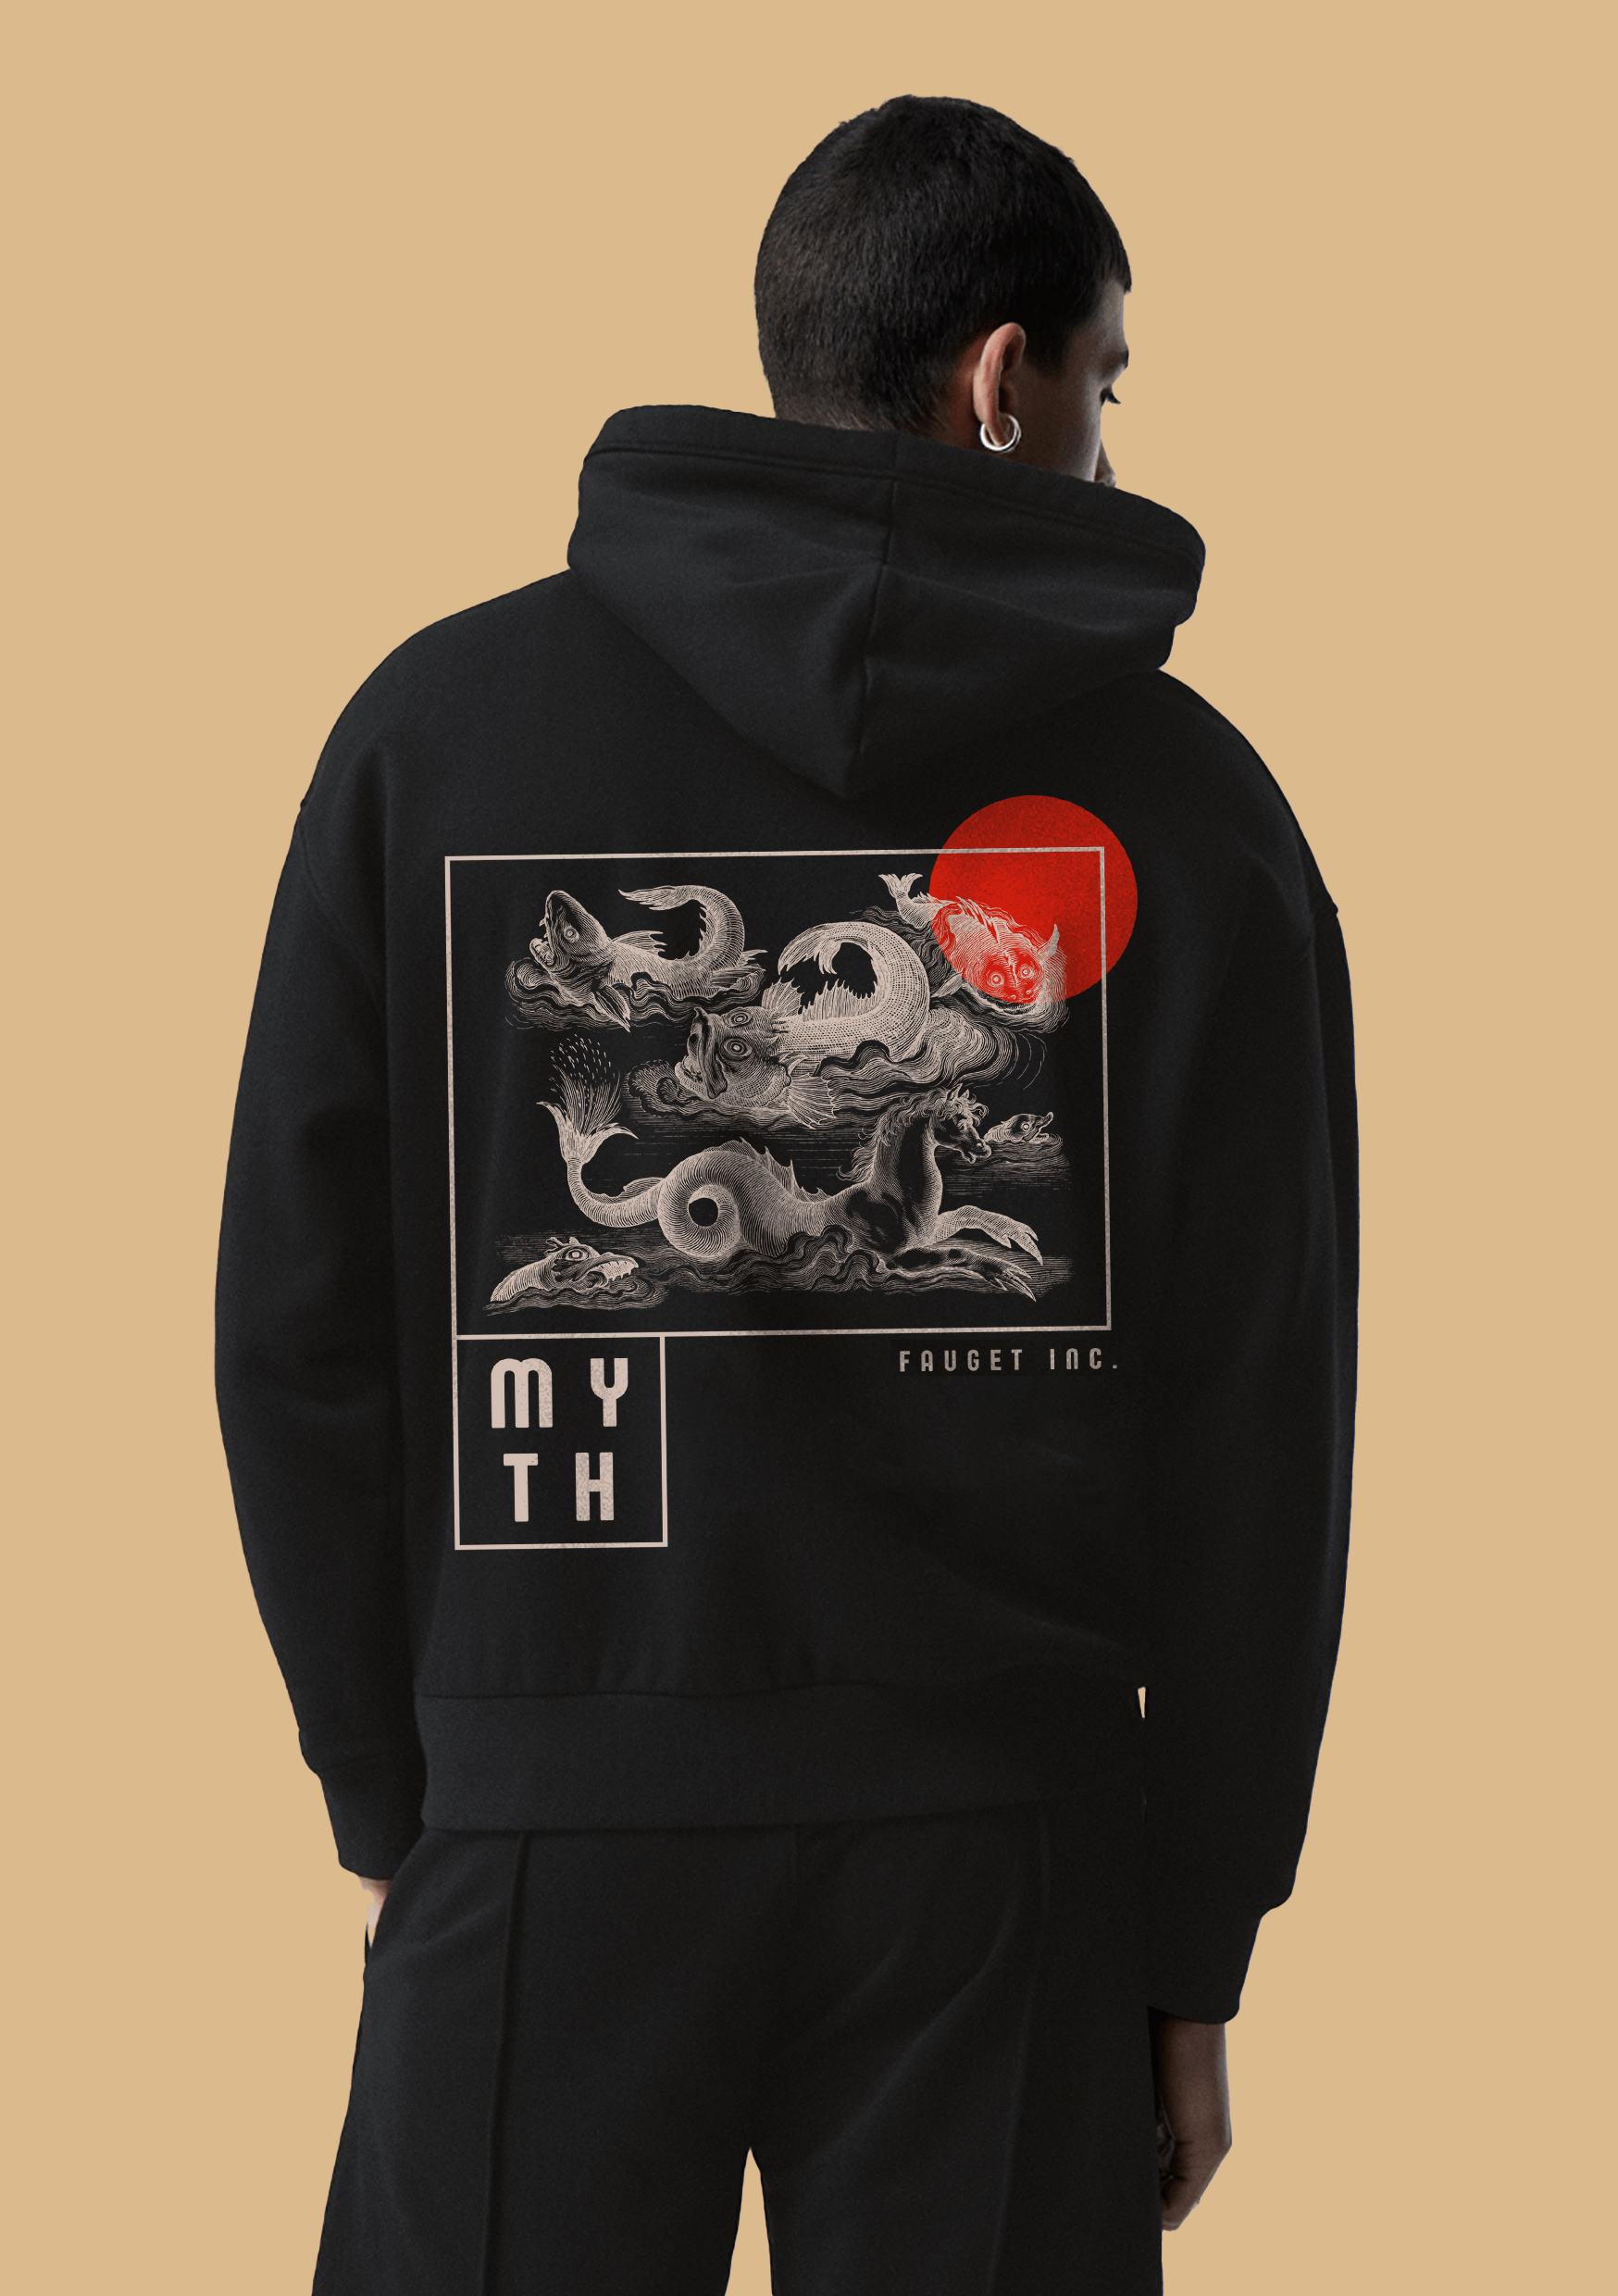 Myth printed black color sweatshirt by offmint